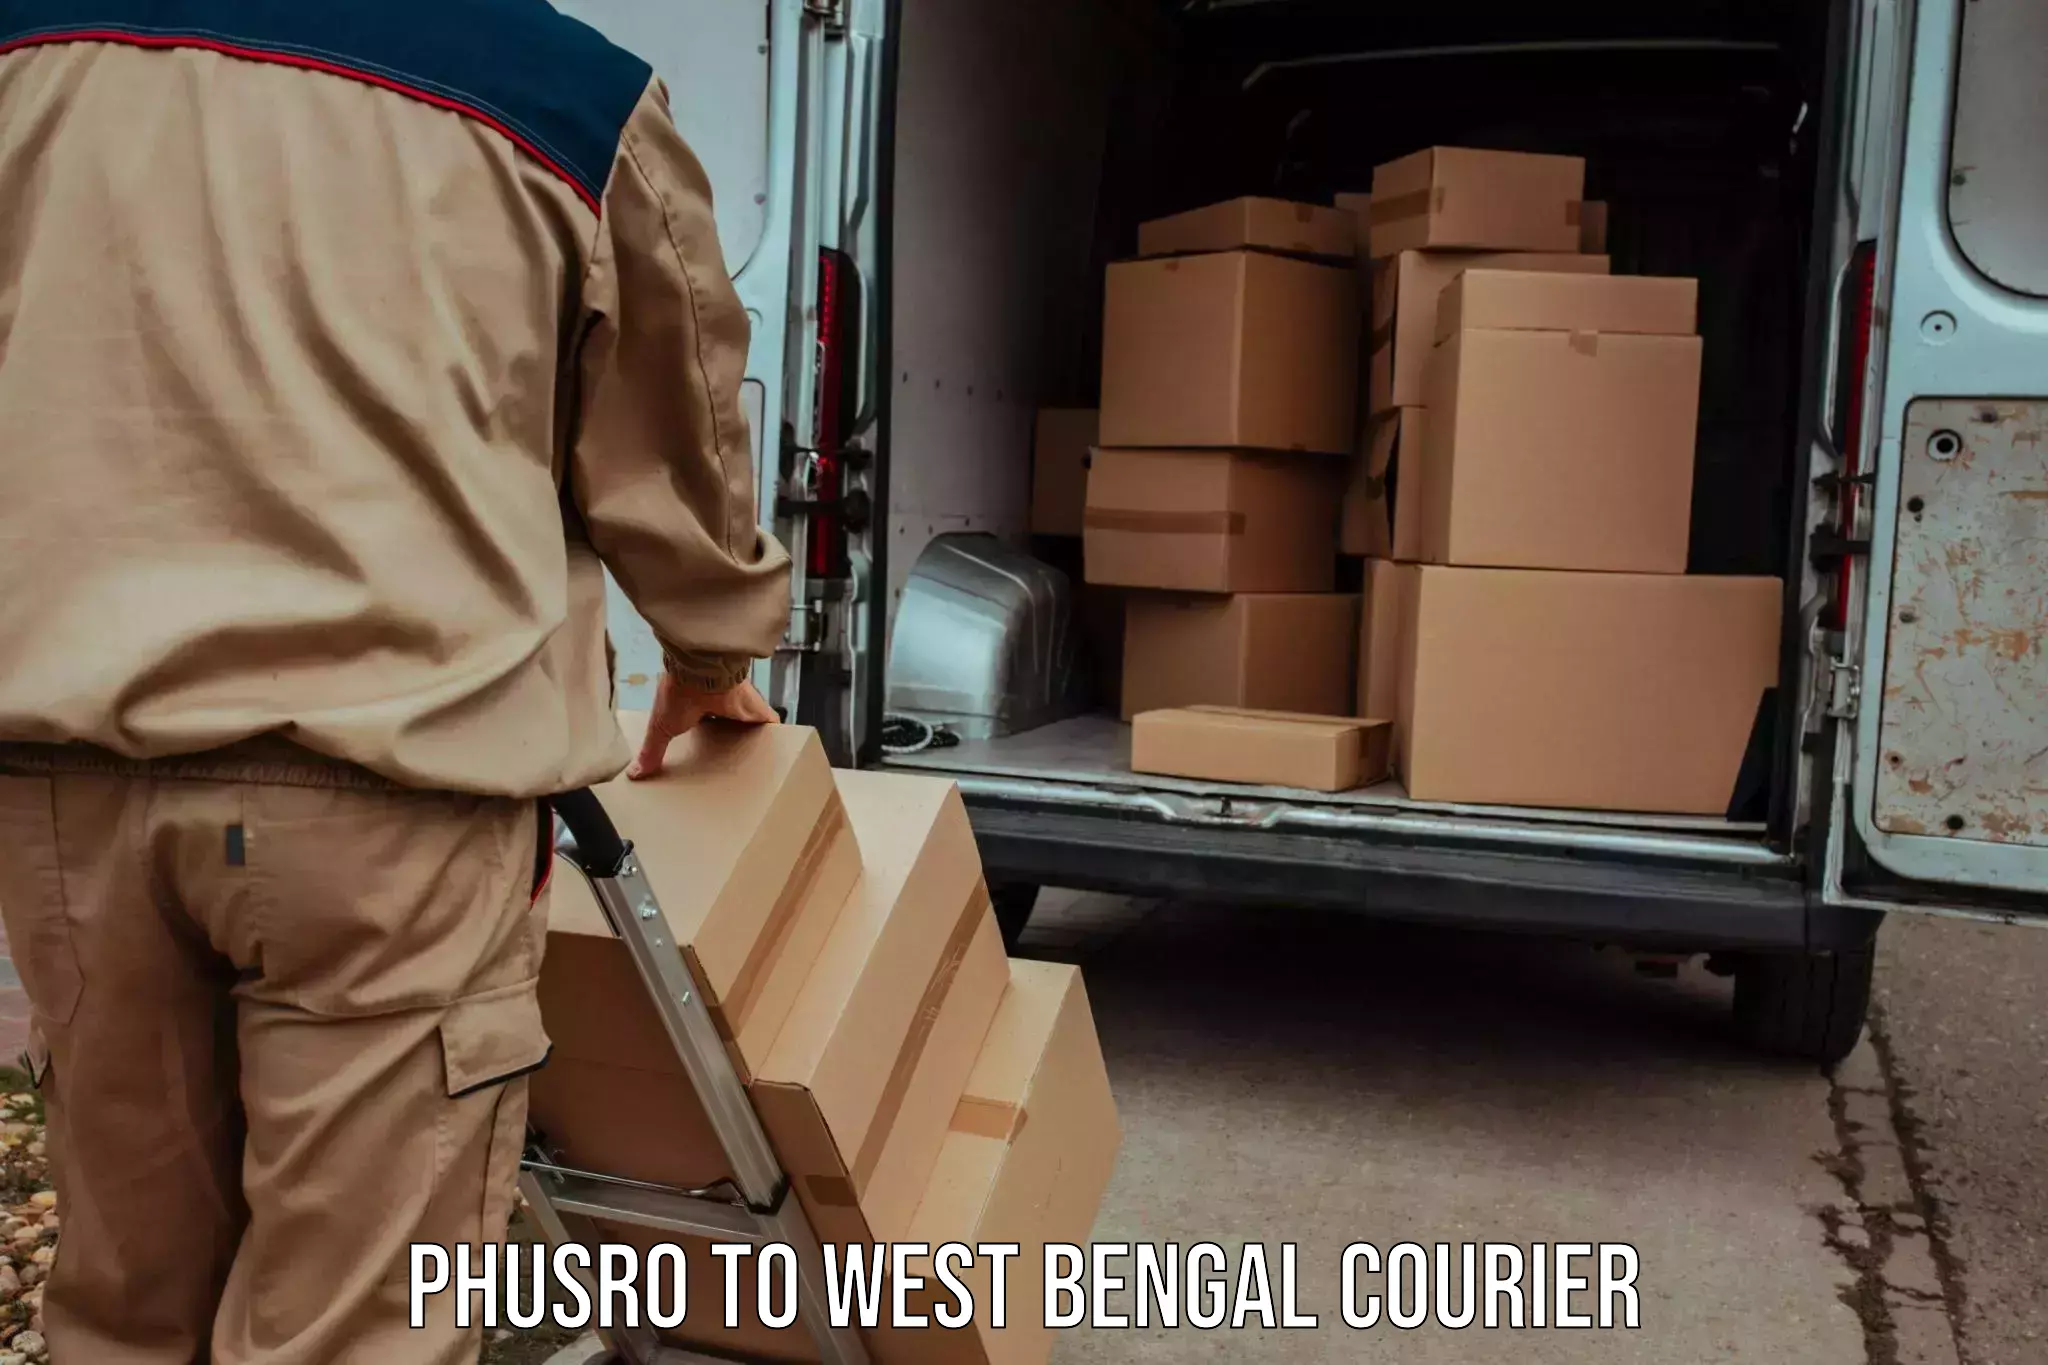 Courier service comparison in Phusro to West Bengal